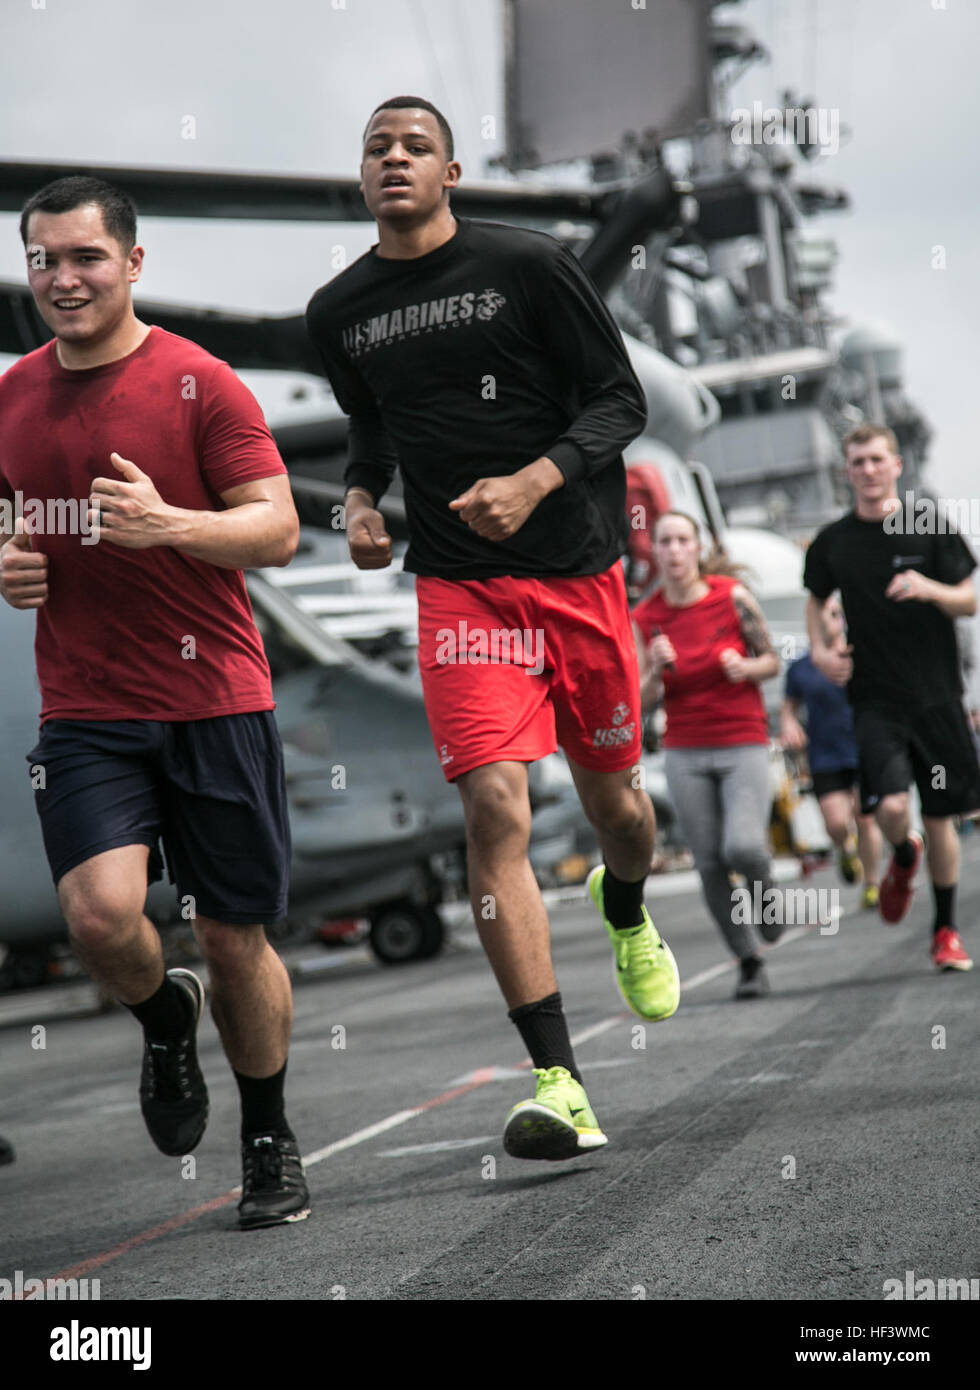 At sea. (March 27, 2016)-U.S. Marines and Sailors with the 13th Marine Expeditionary Unit and Boxer Amphibious Ready Group, participate in a 5k run for women's history month, March 27, 2016, during the MEU's western pacific deployment aboard the USS Boxer. More then 4,500 Marines and Sailors from the Boxer ARG, 13th MEU team are currently transiting the Pacific Ocean toward the U.S. 5th fleet area of operations during a scheduled deployment. (U.S. Marine Corps photo by Sgt. Briauna Birl/RELEASED) Women's History 5k aboard USS Boxer 160327-M-KR317-209 Stock Photo